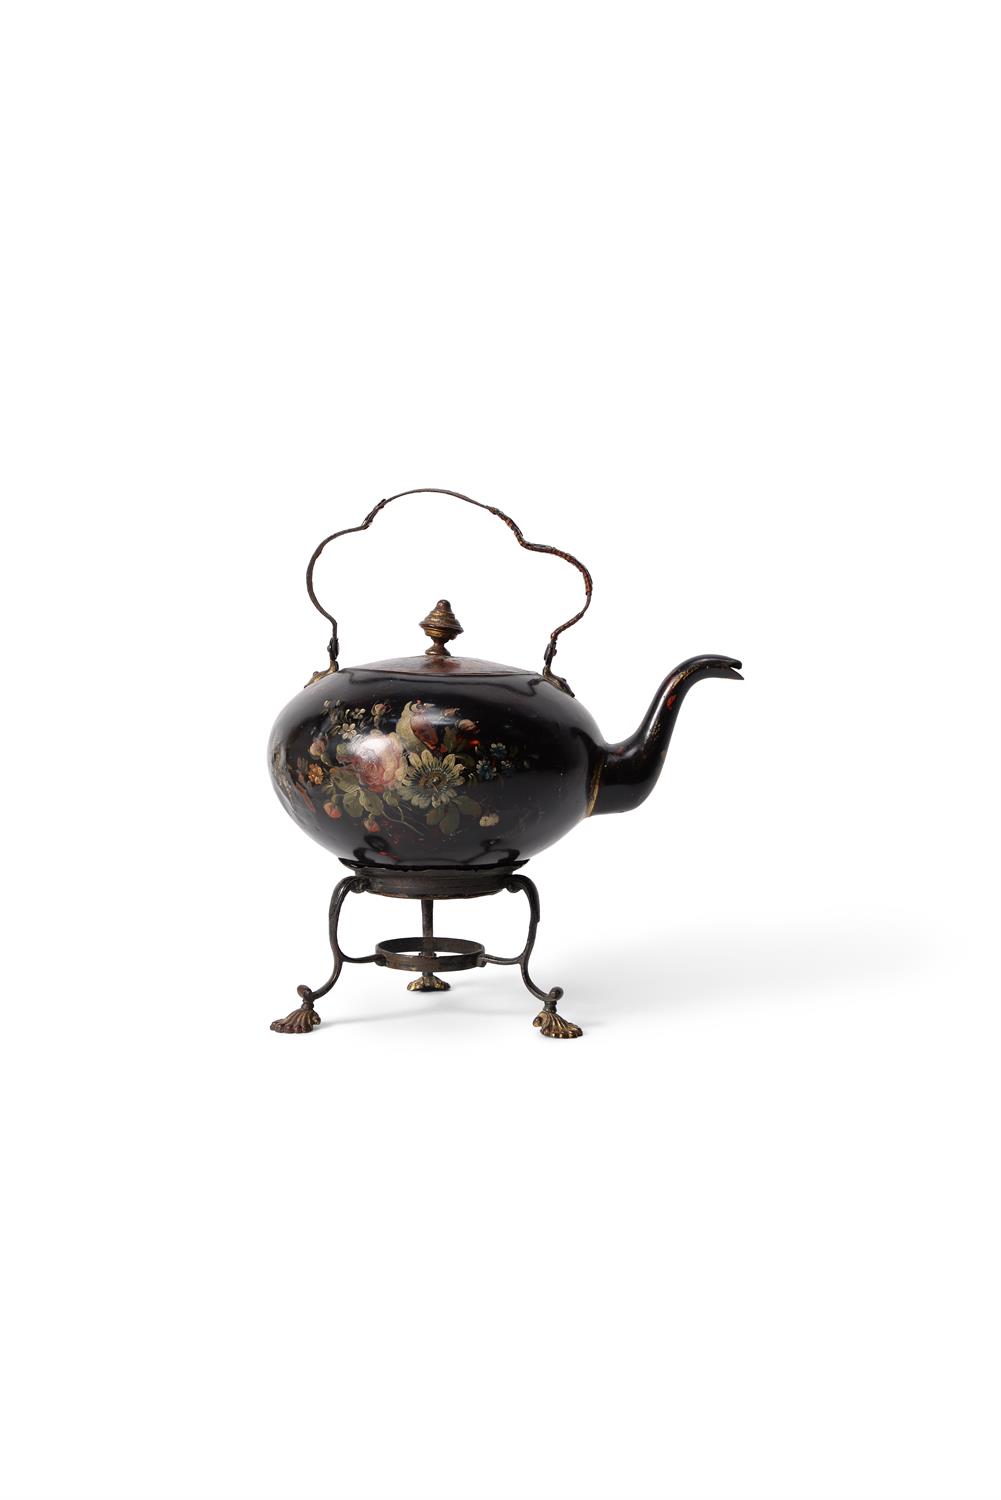 A Regency toleware kettle and stand